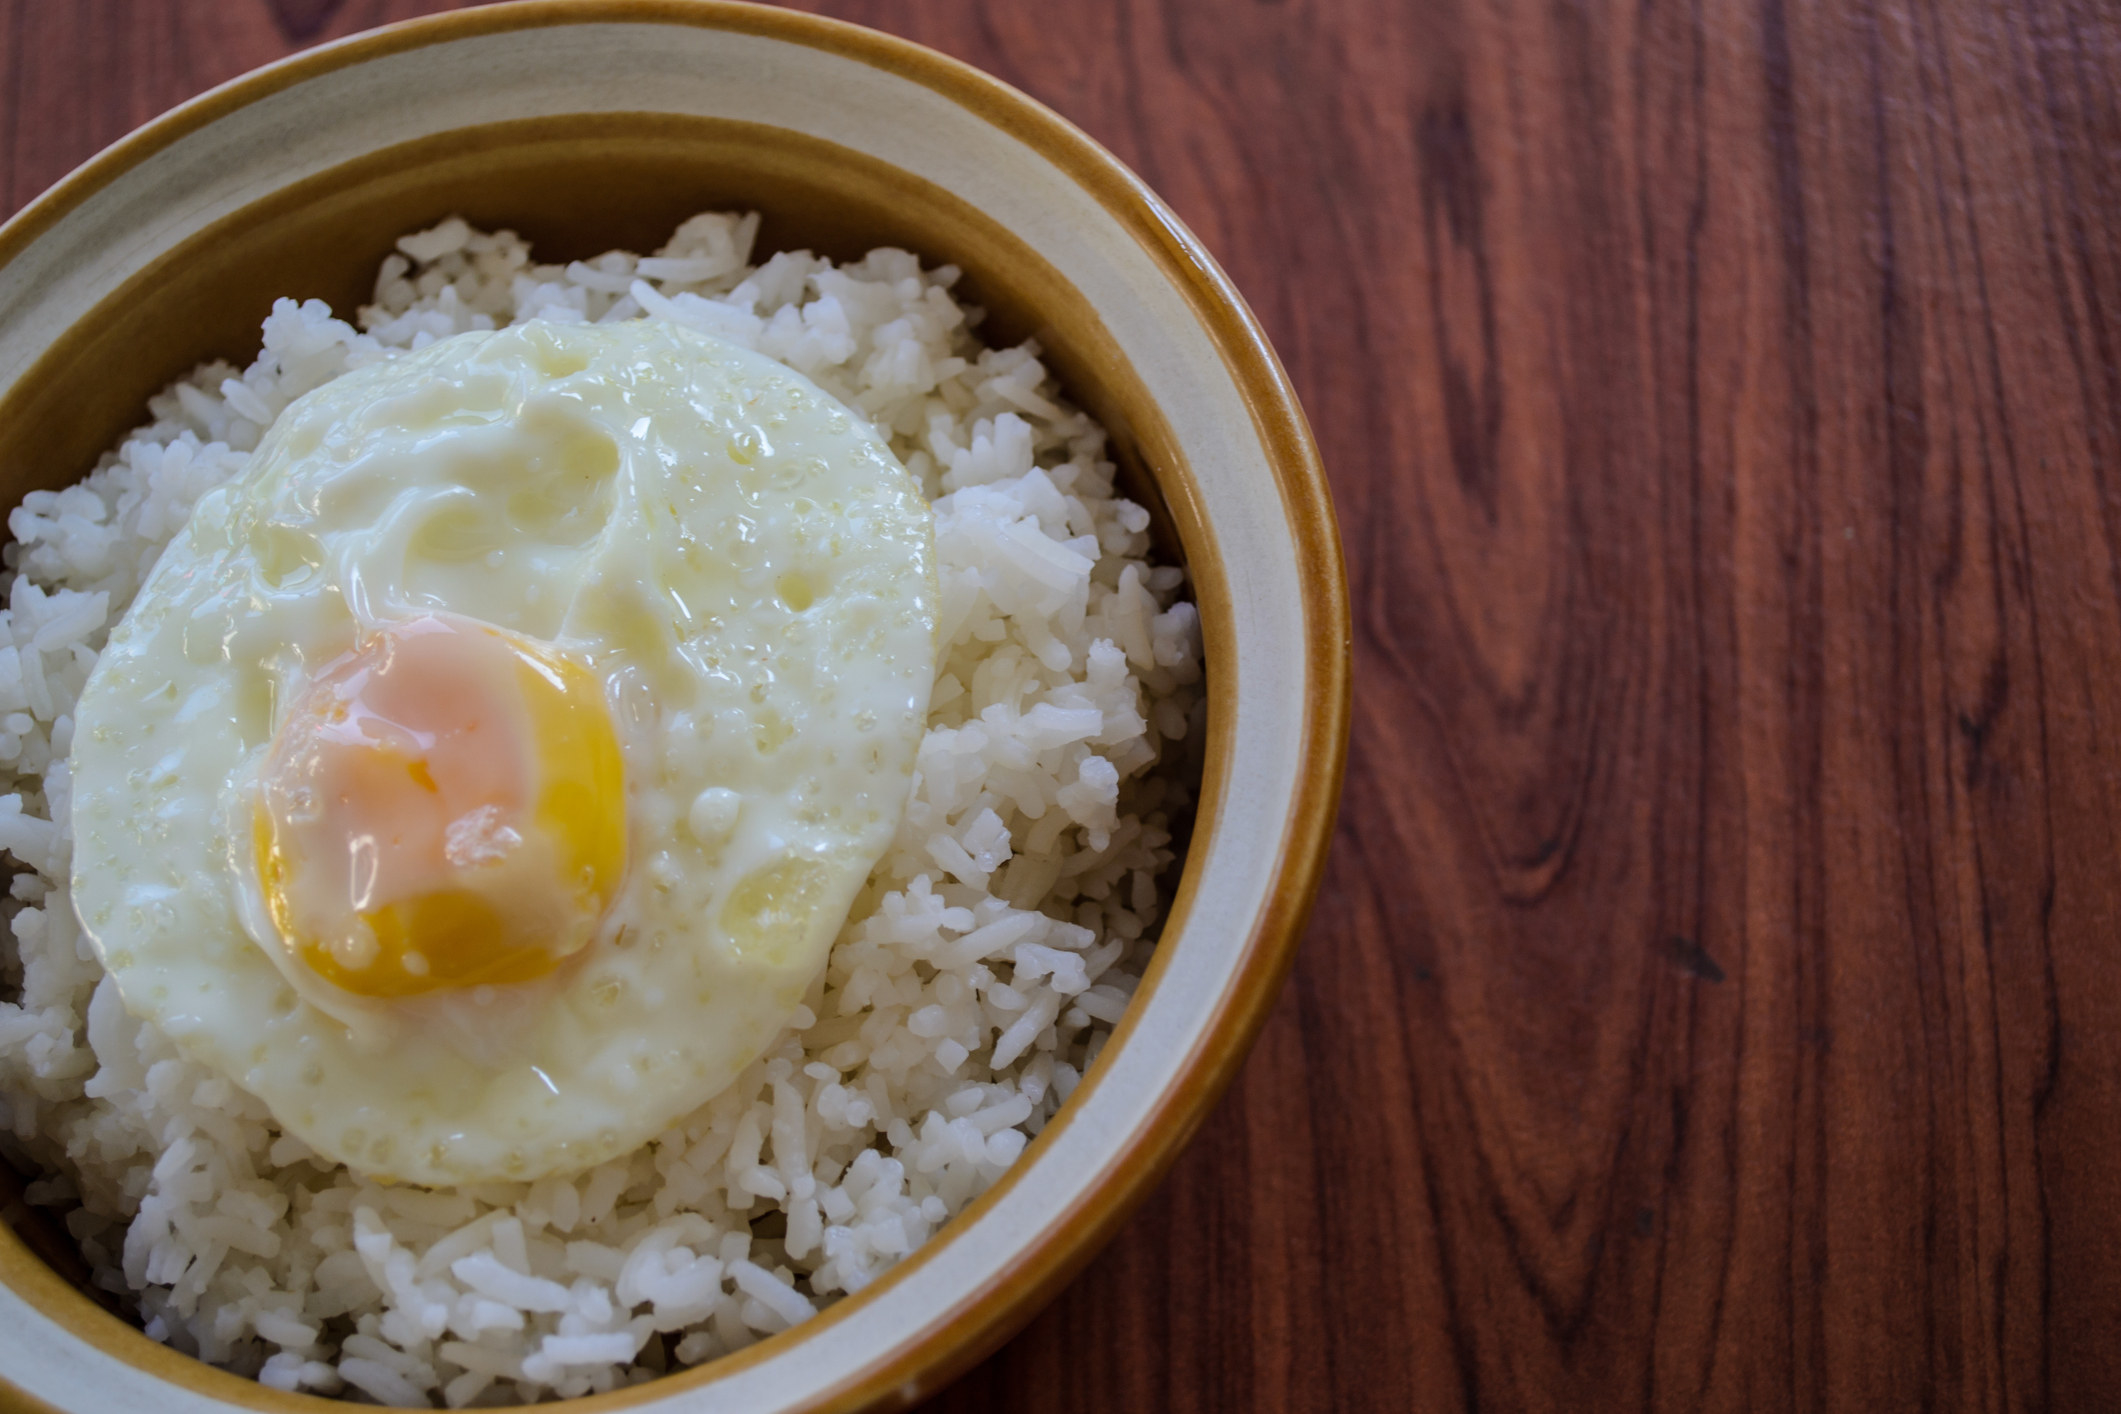 Fried egg on a bowl of rice